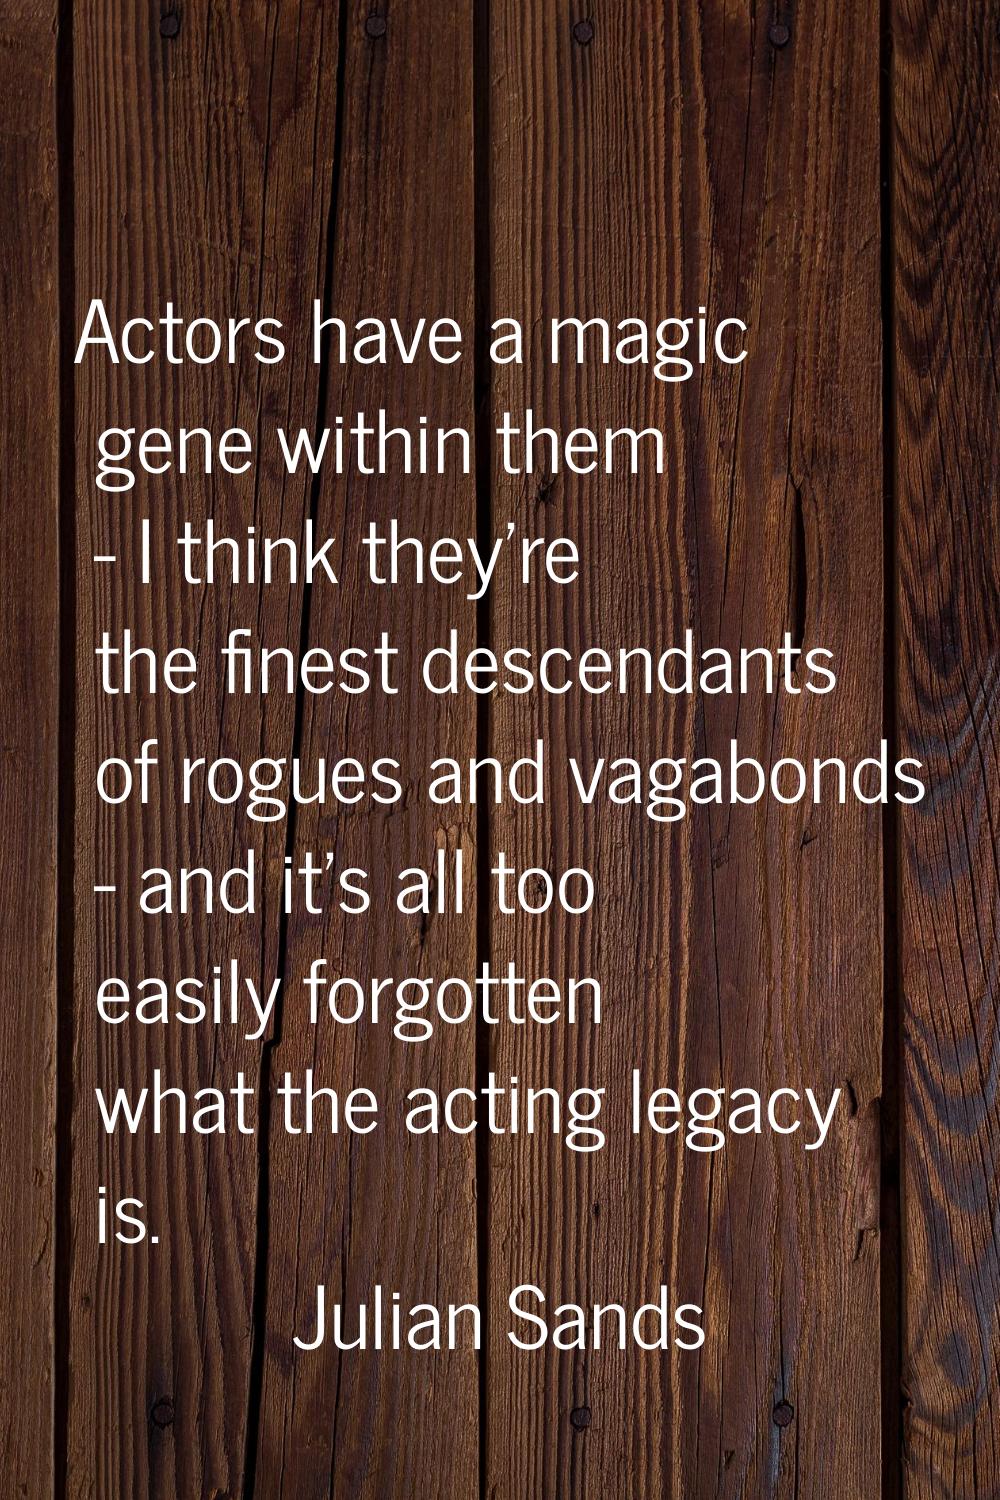 Actors have a magic gene within them - I think they're the finest descendants of rogues and vagabon